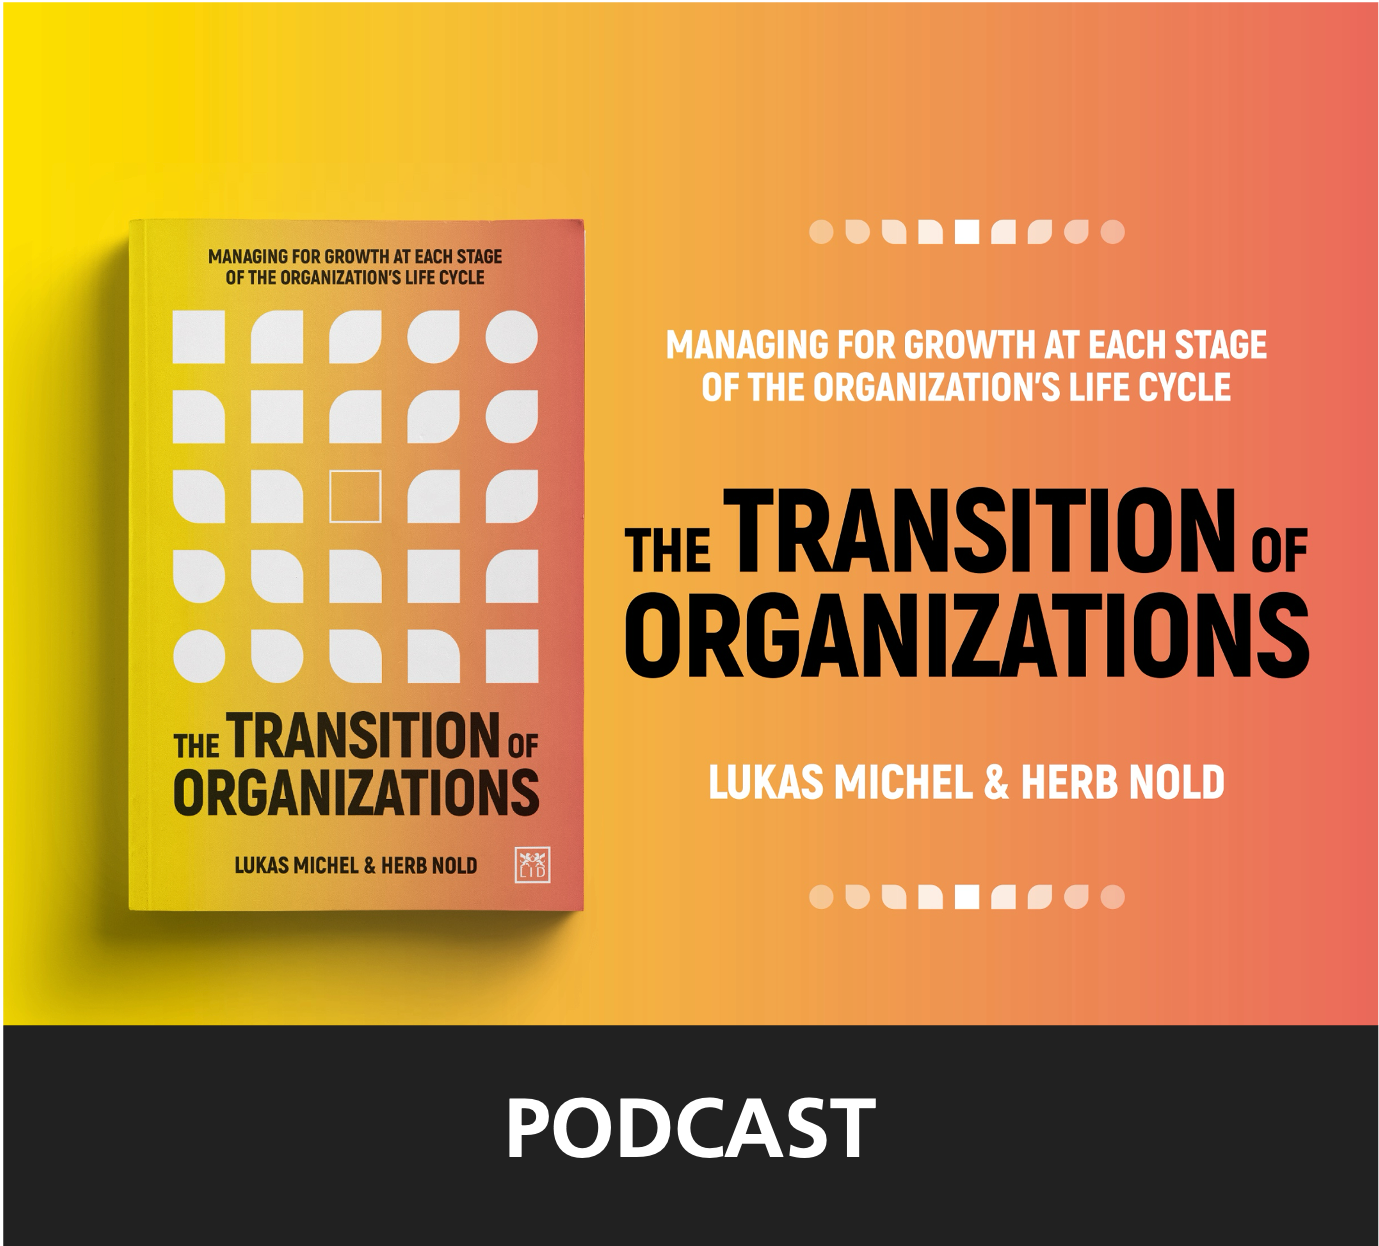 Interview with Lukas Michel: The Transition of Organizations